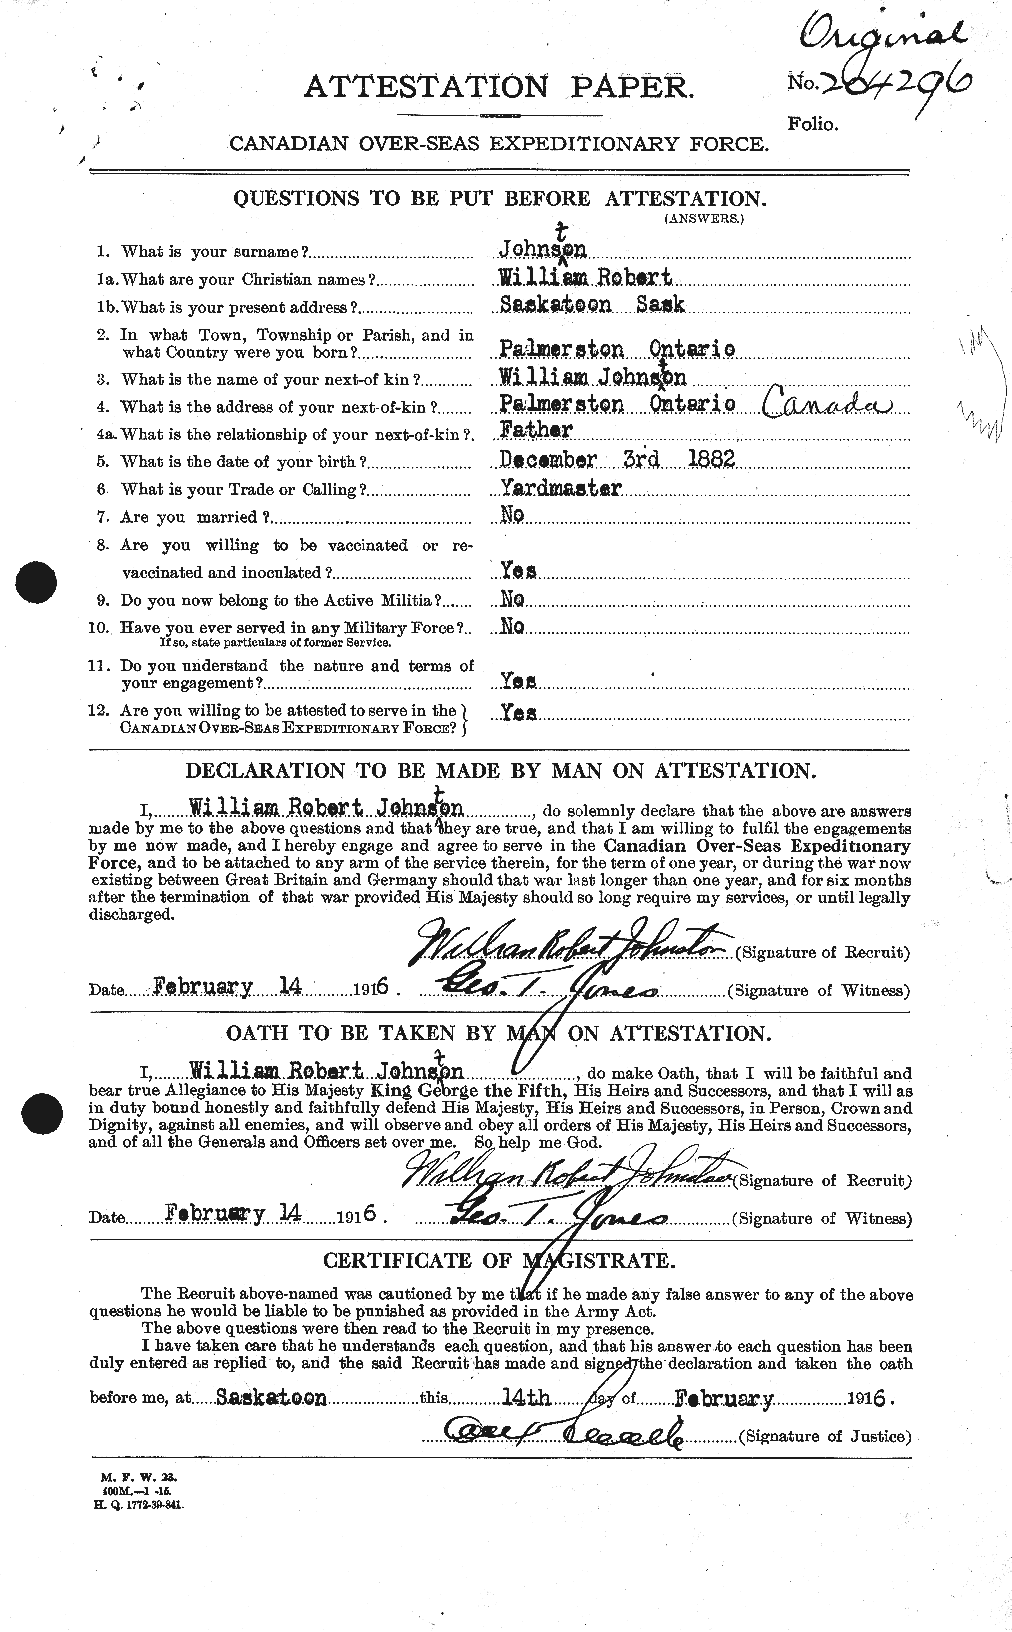 Personnel Records of the First World War - CEF 429612a